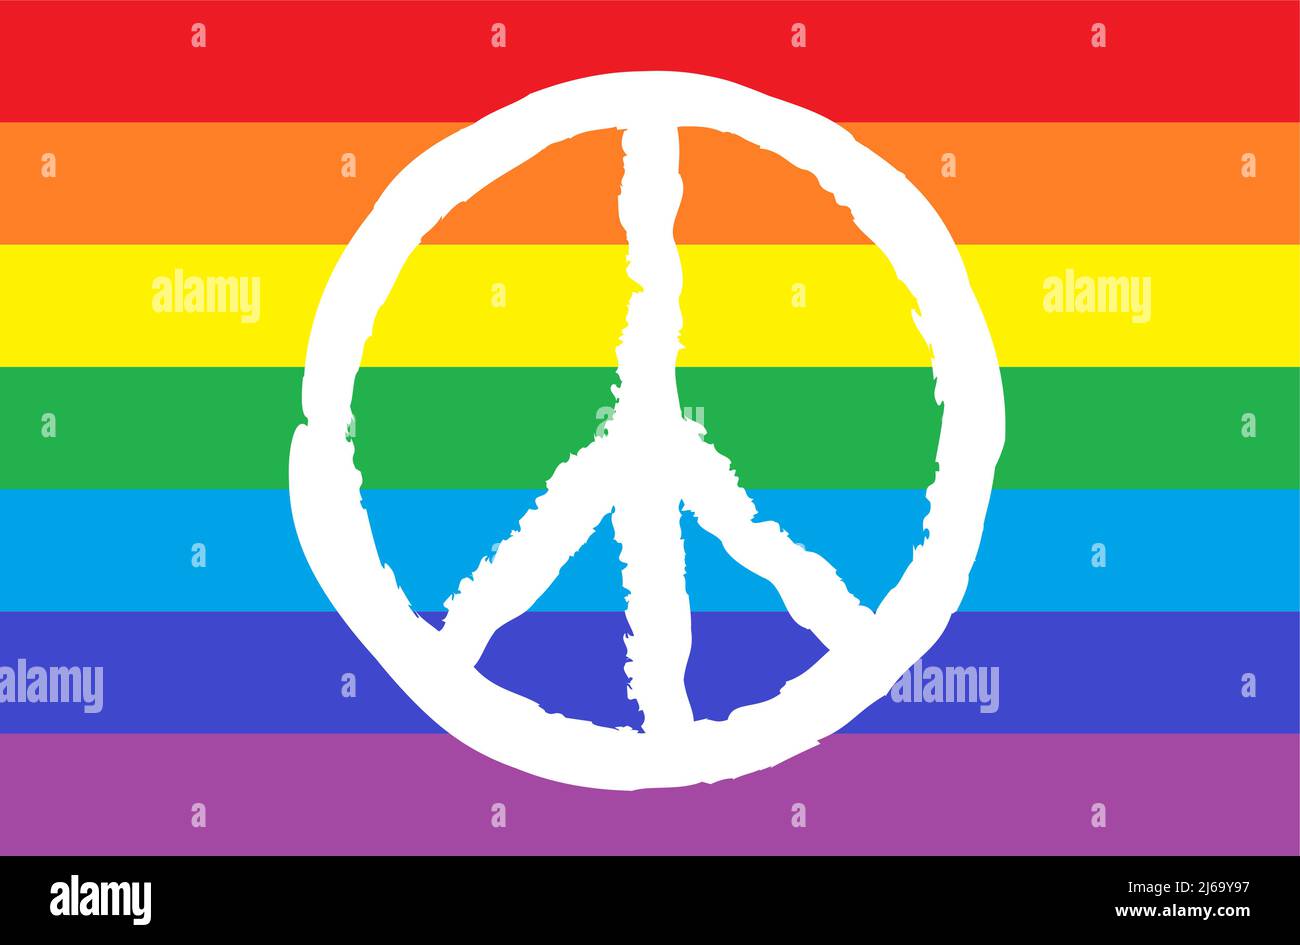 eps vector illustration showing peace sign colored white on rainbow colors flag Stock Vector